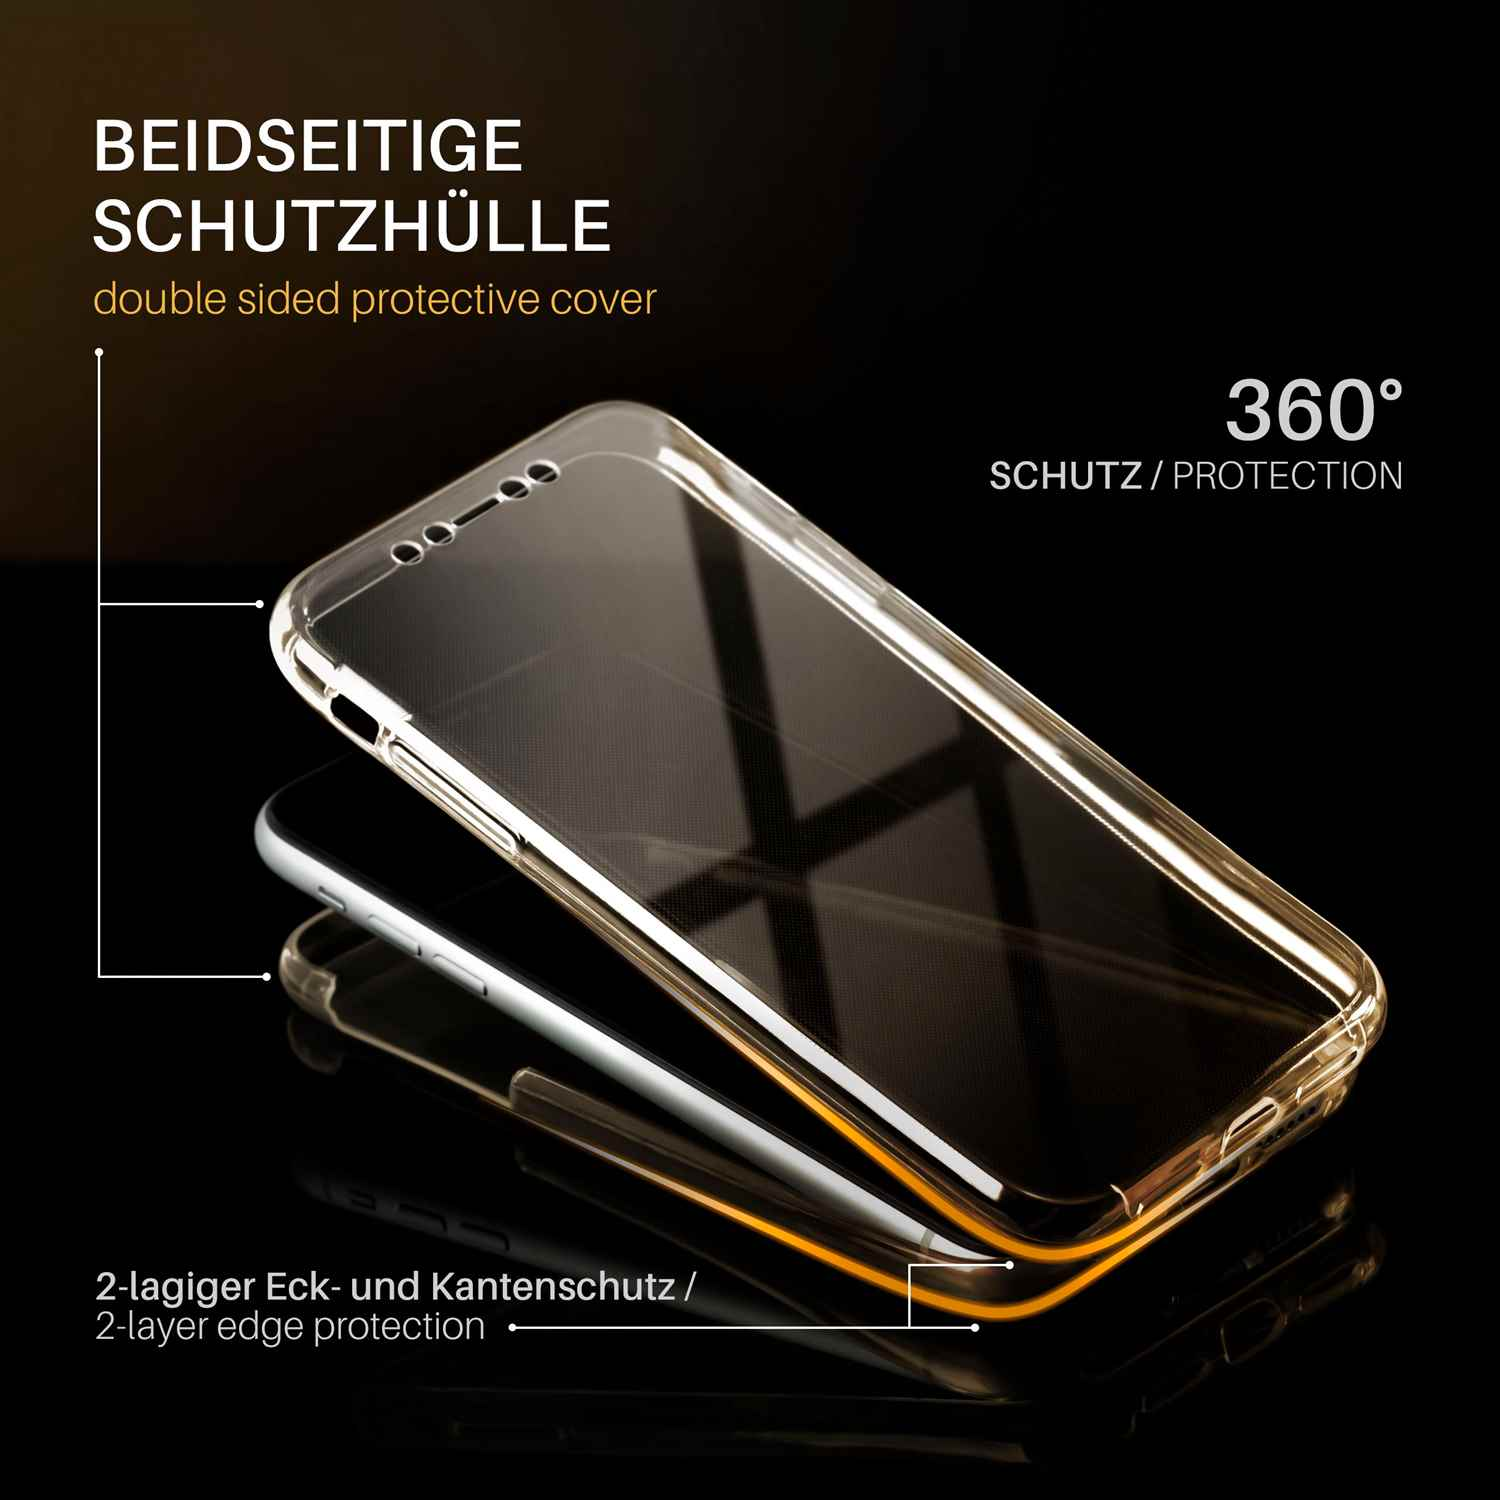 MOEX Double Case, Full Cover, 4S, iPhone Apple, Gold